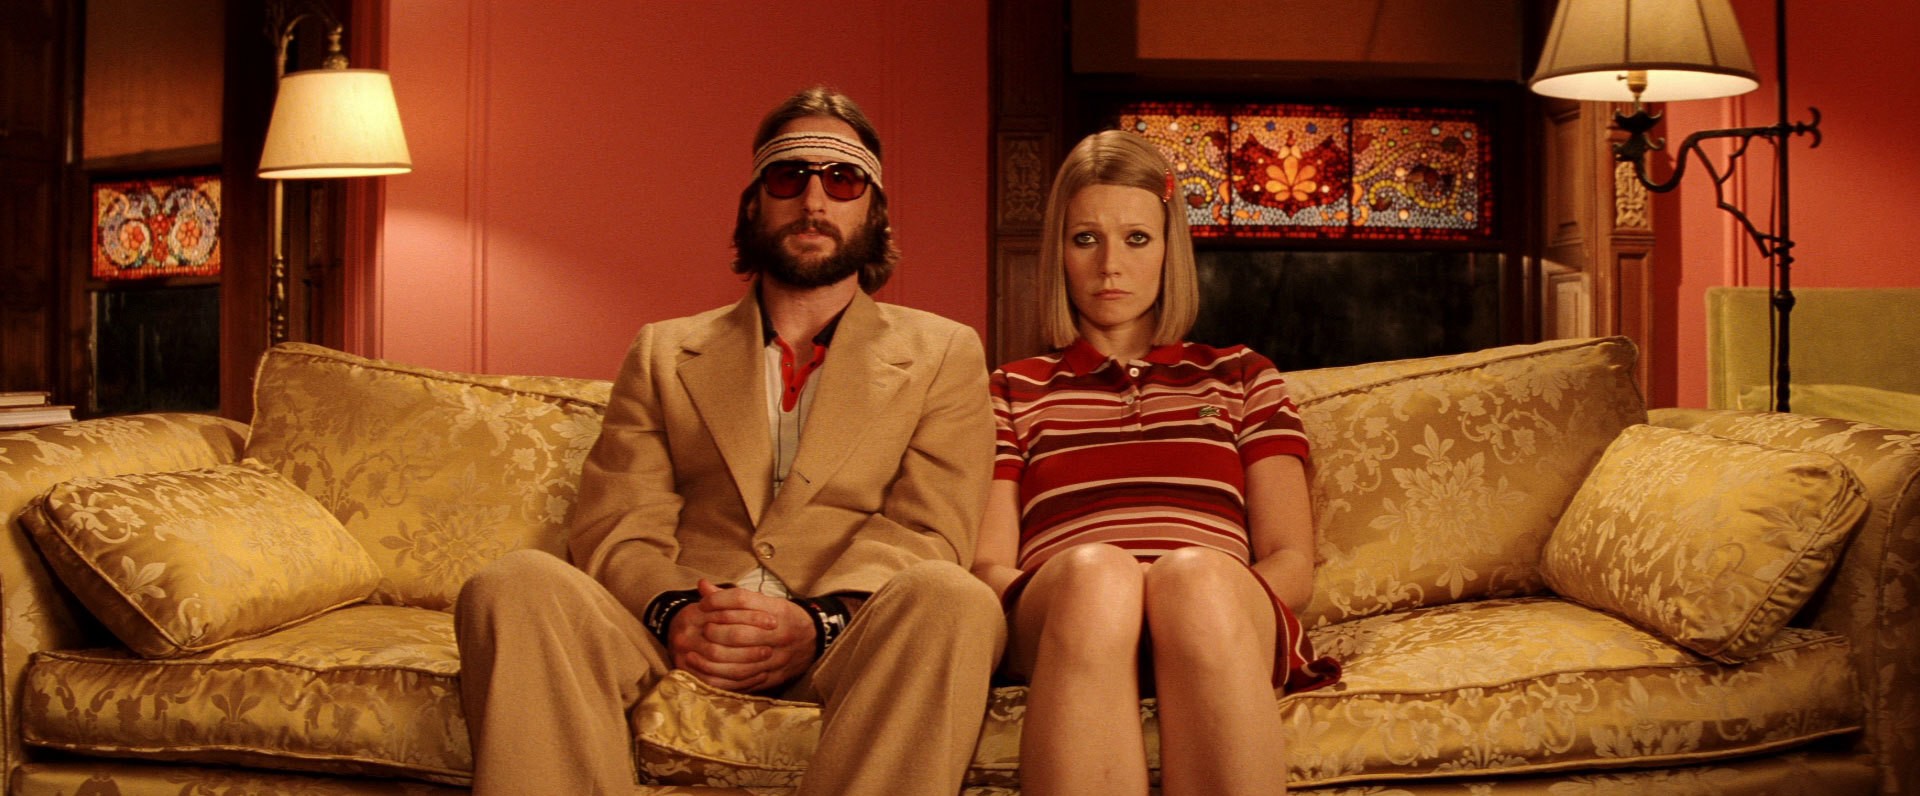 Pin by The *it Magazine on Style  Wes anderson style, Decades of